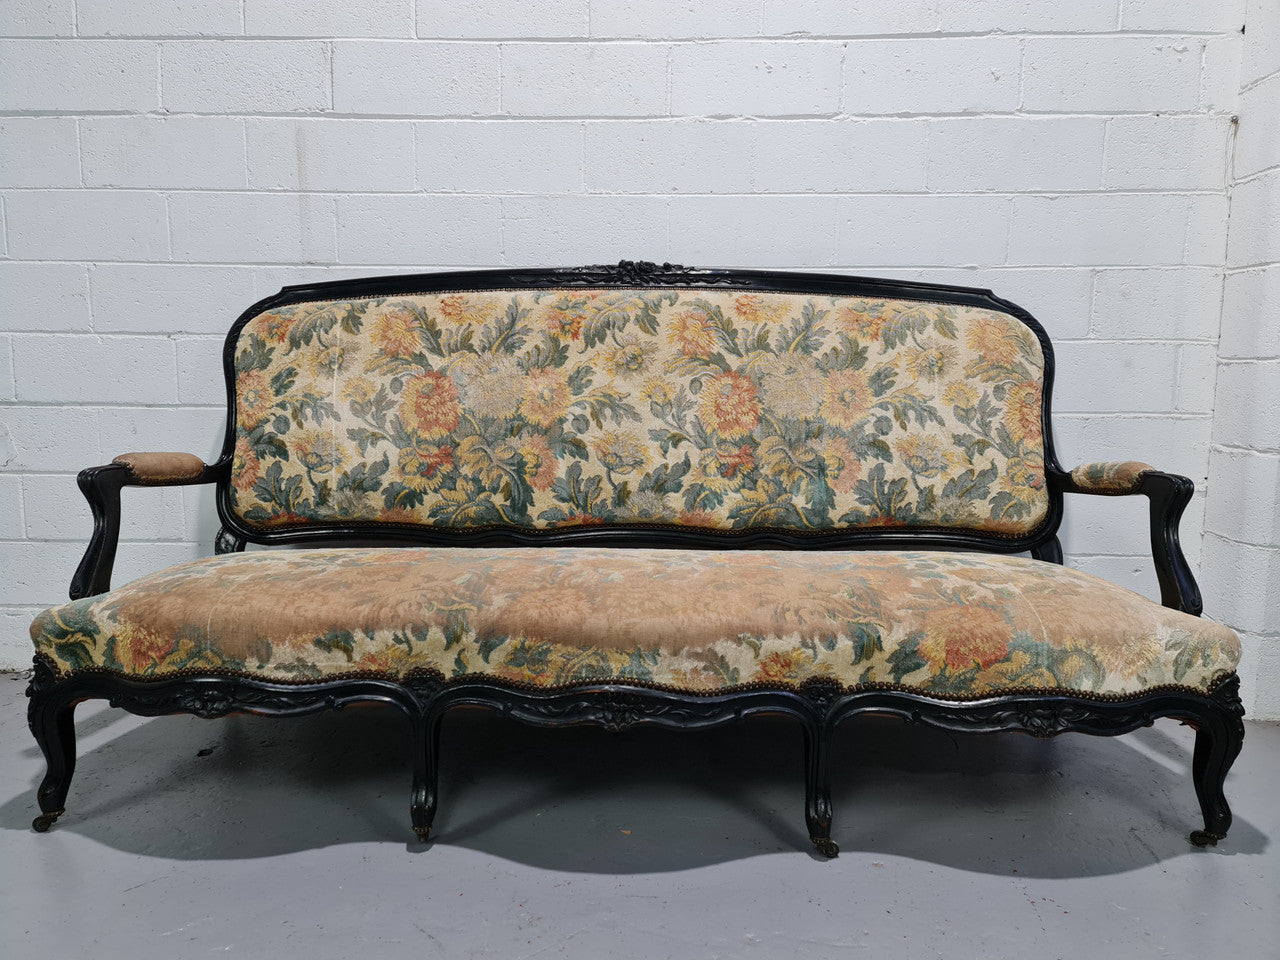 Substantial Antique 19th century Louis XV style ebonized serpentine front settee. The fabric is in used condition showing use and could be used as is or reupholster. Very easily sits three people with space between each person. Also selling separately a pair of matching arm chairs.